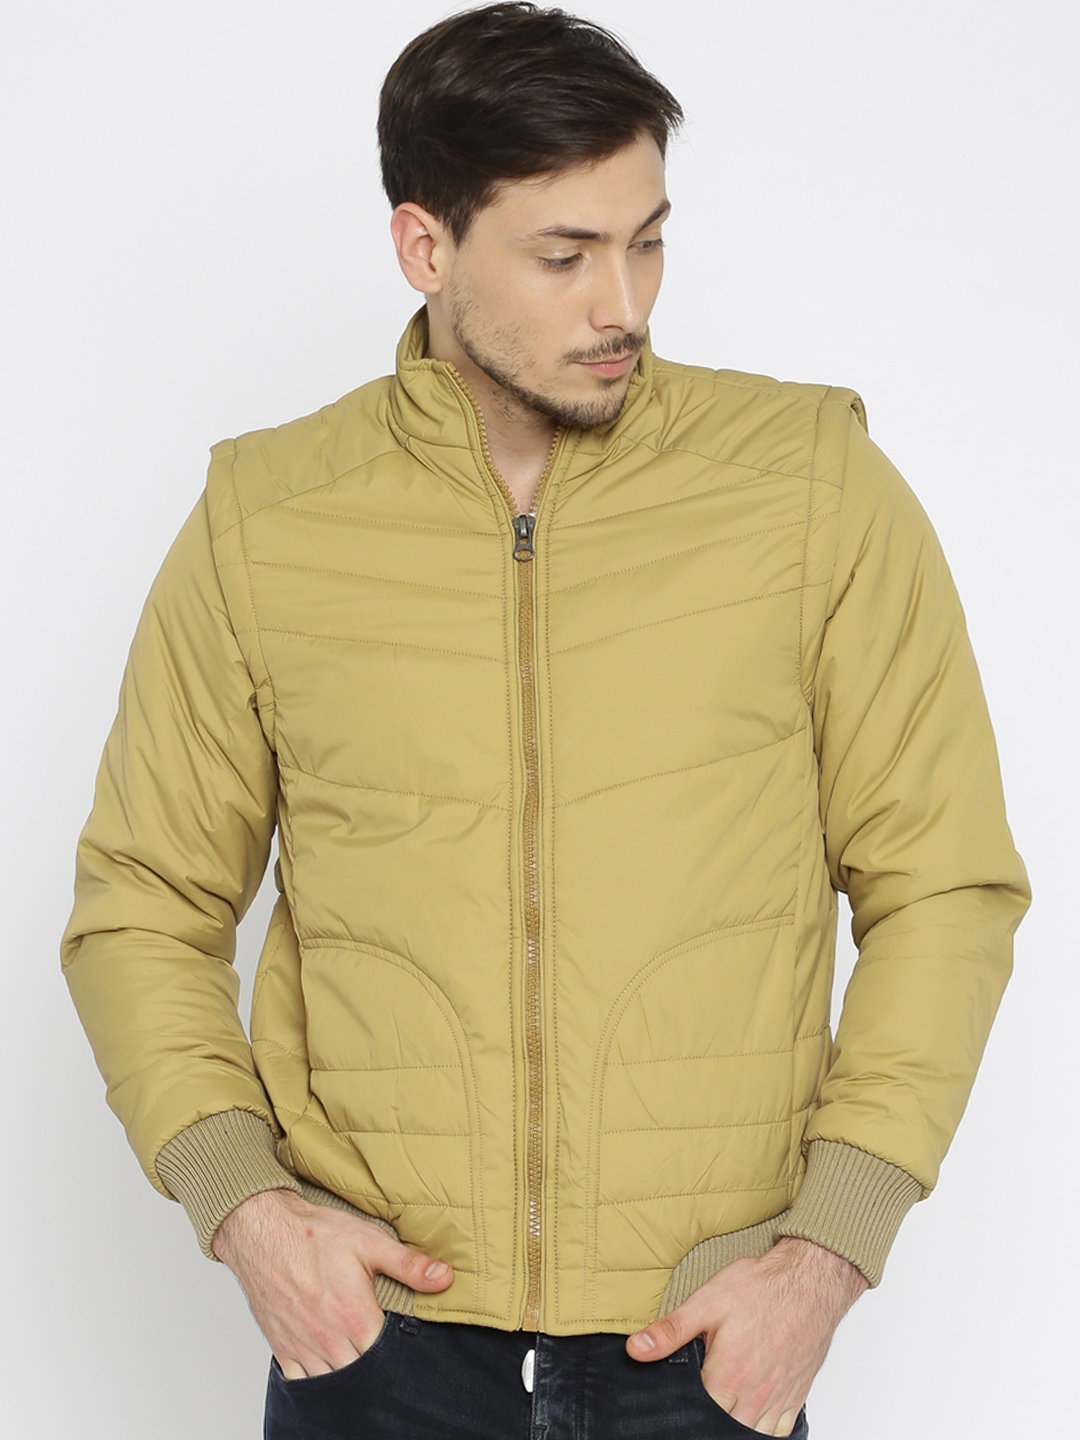 Buy Nature Casuals Beige Puffer Jacket - Jackets for Men 1670683 | Myntra